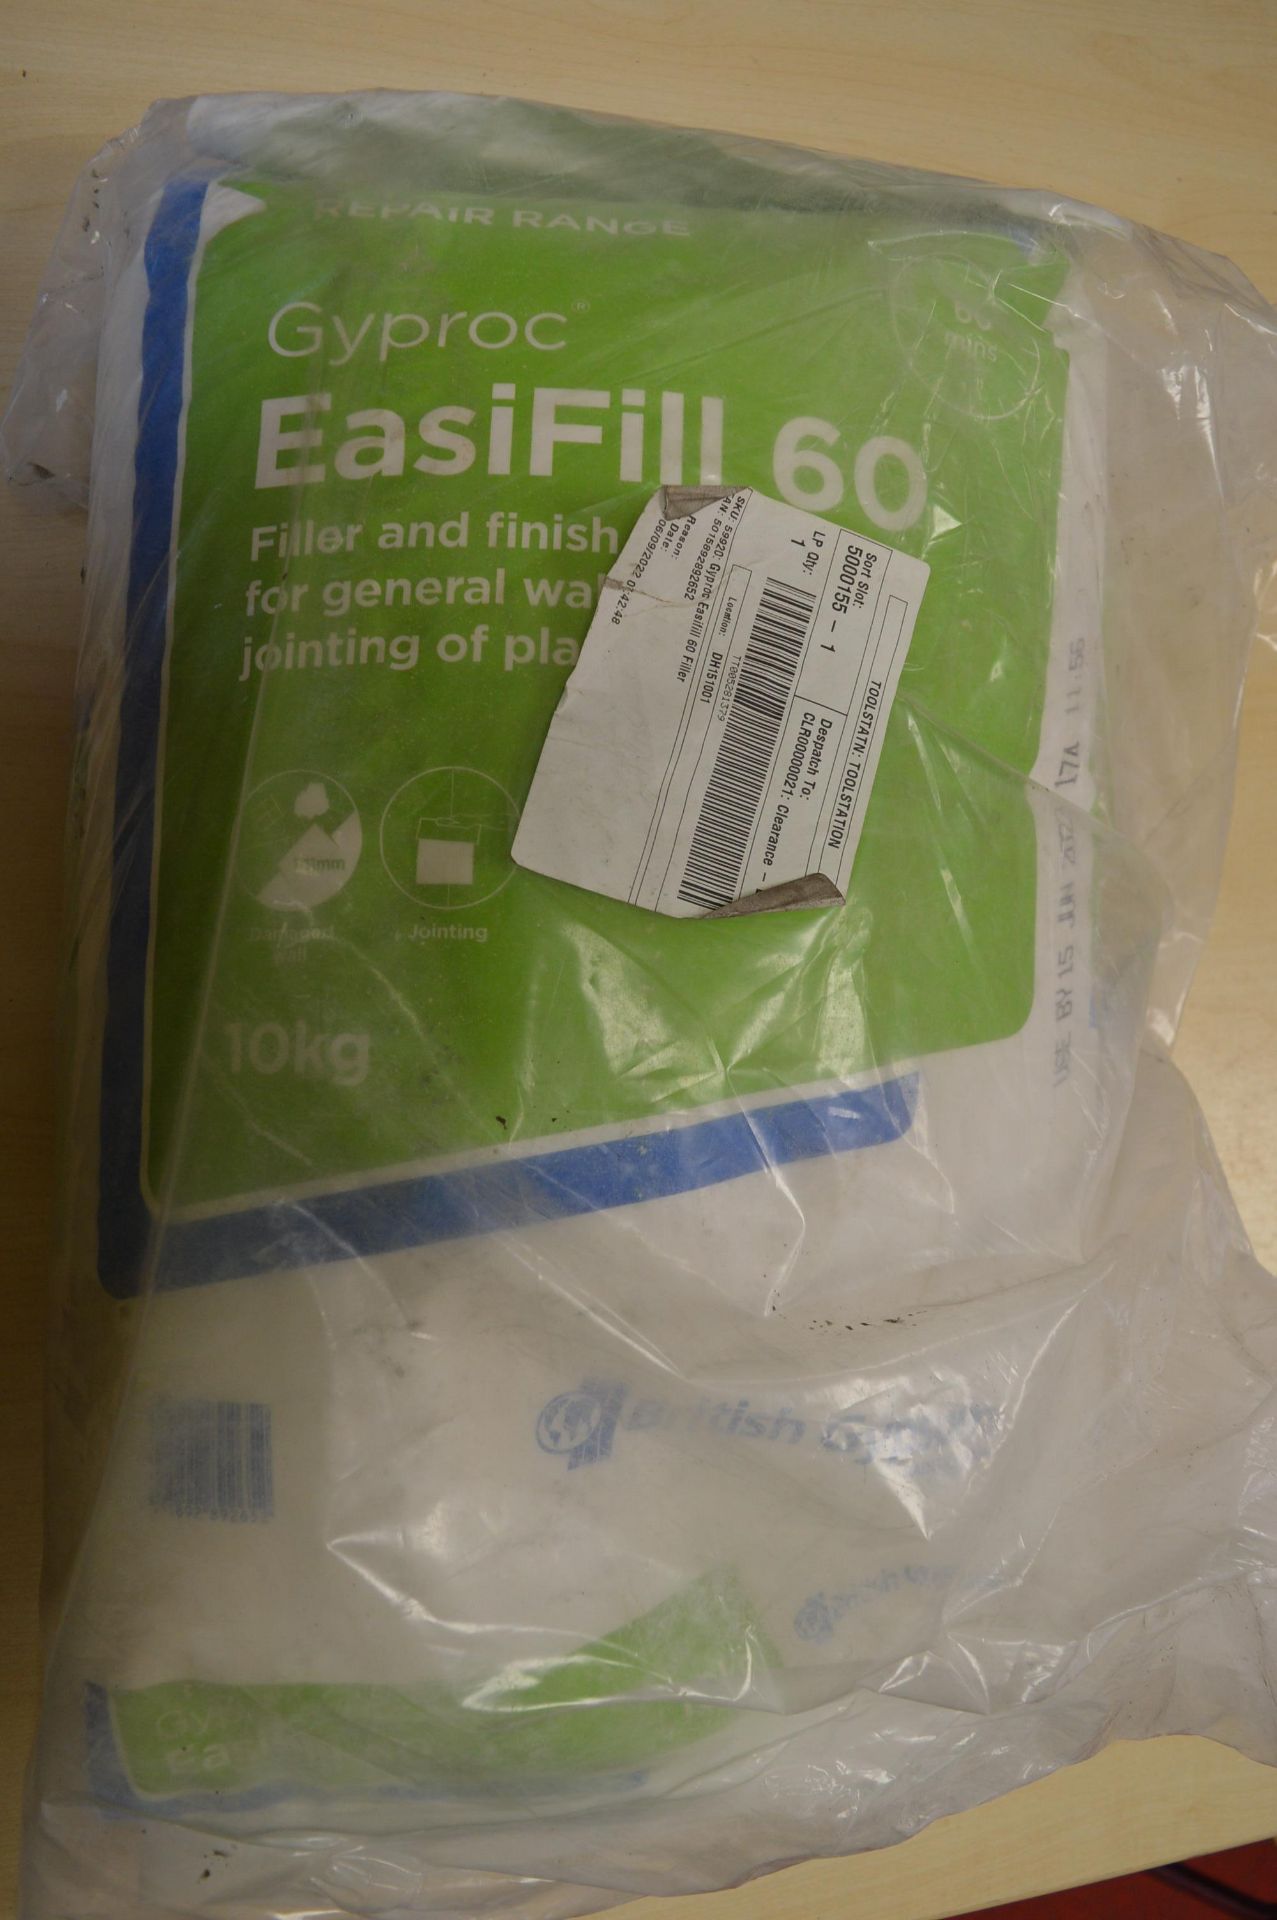 *10kg of EasiFill 60 Jointing Compound